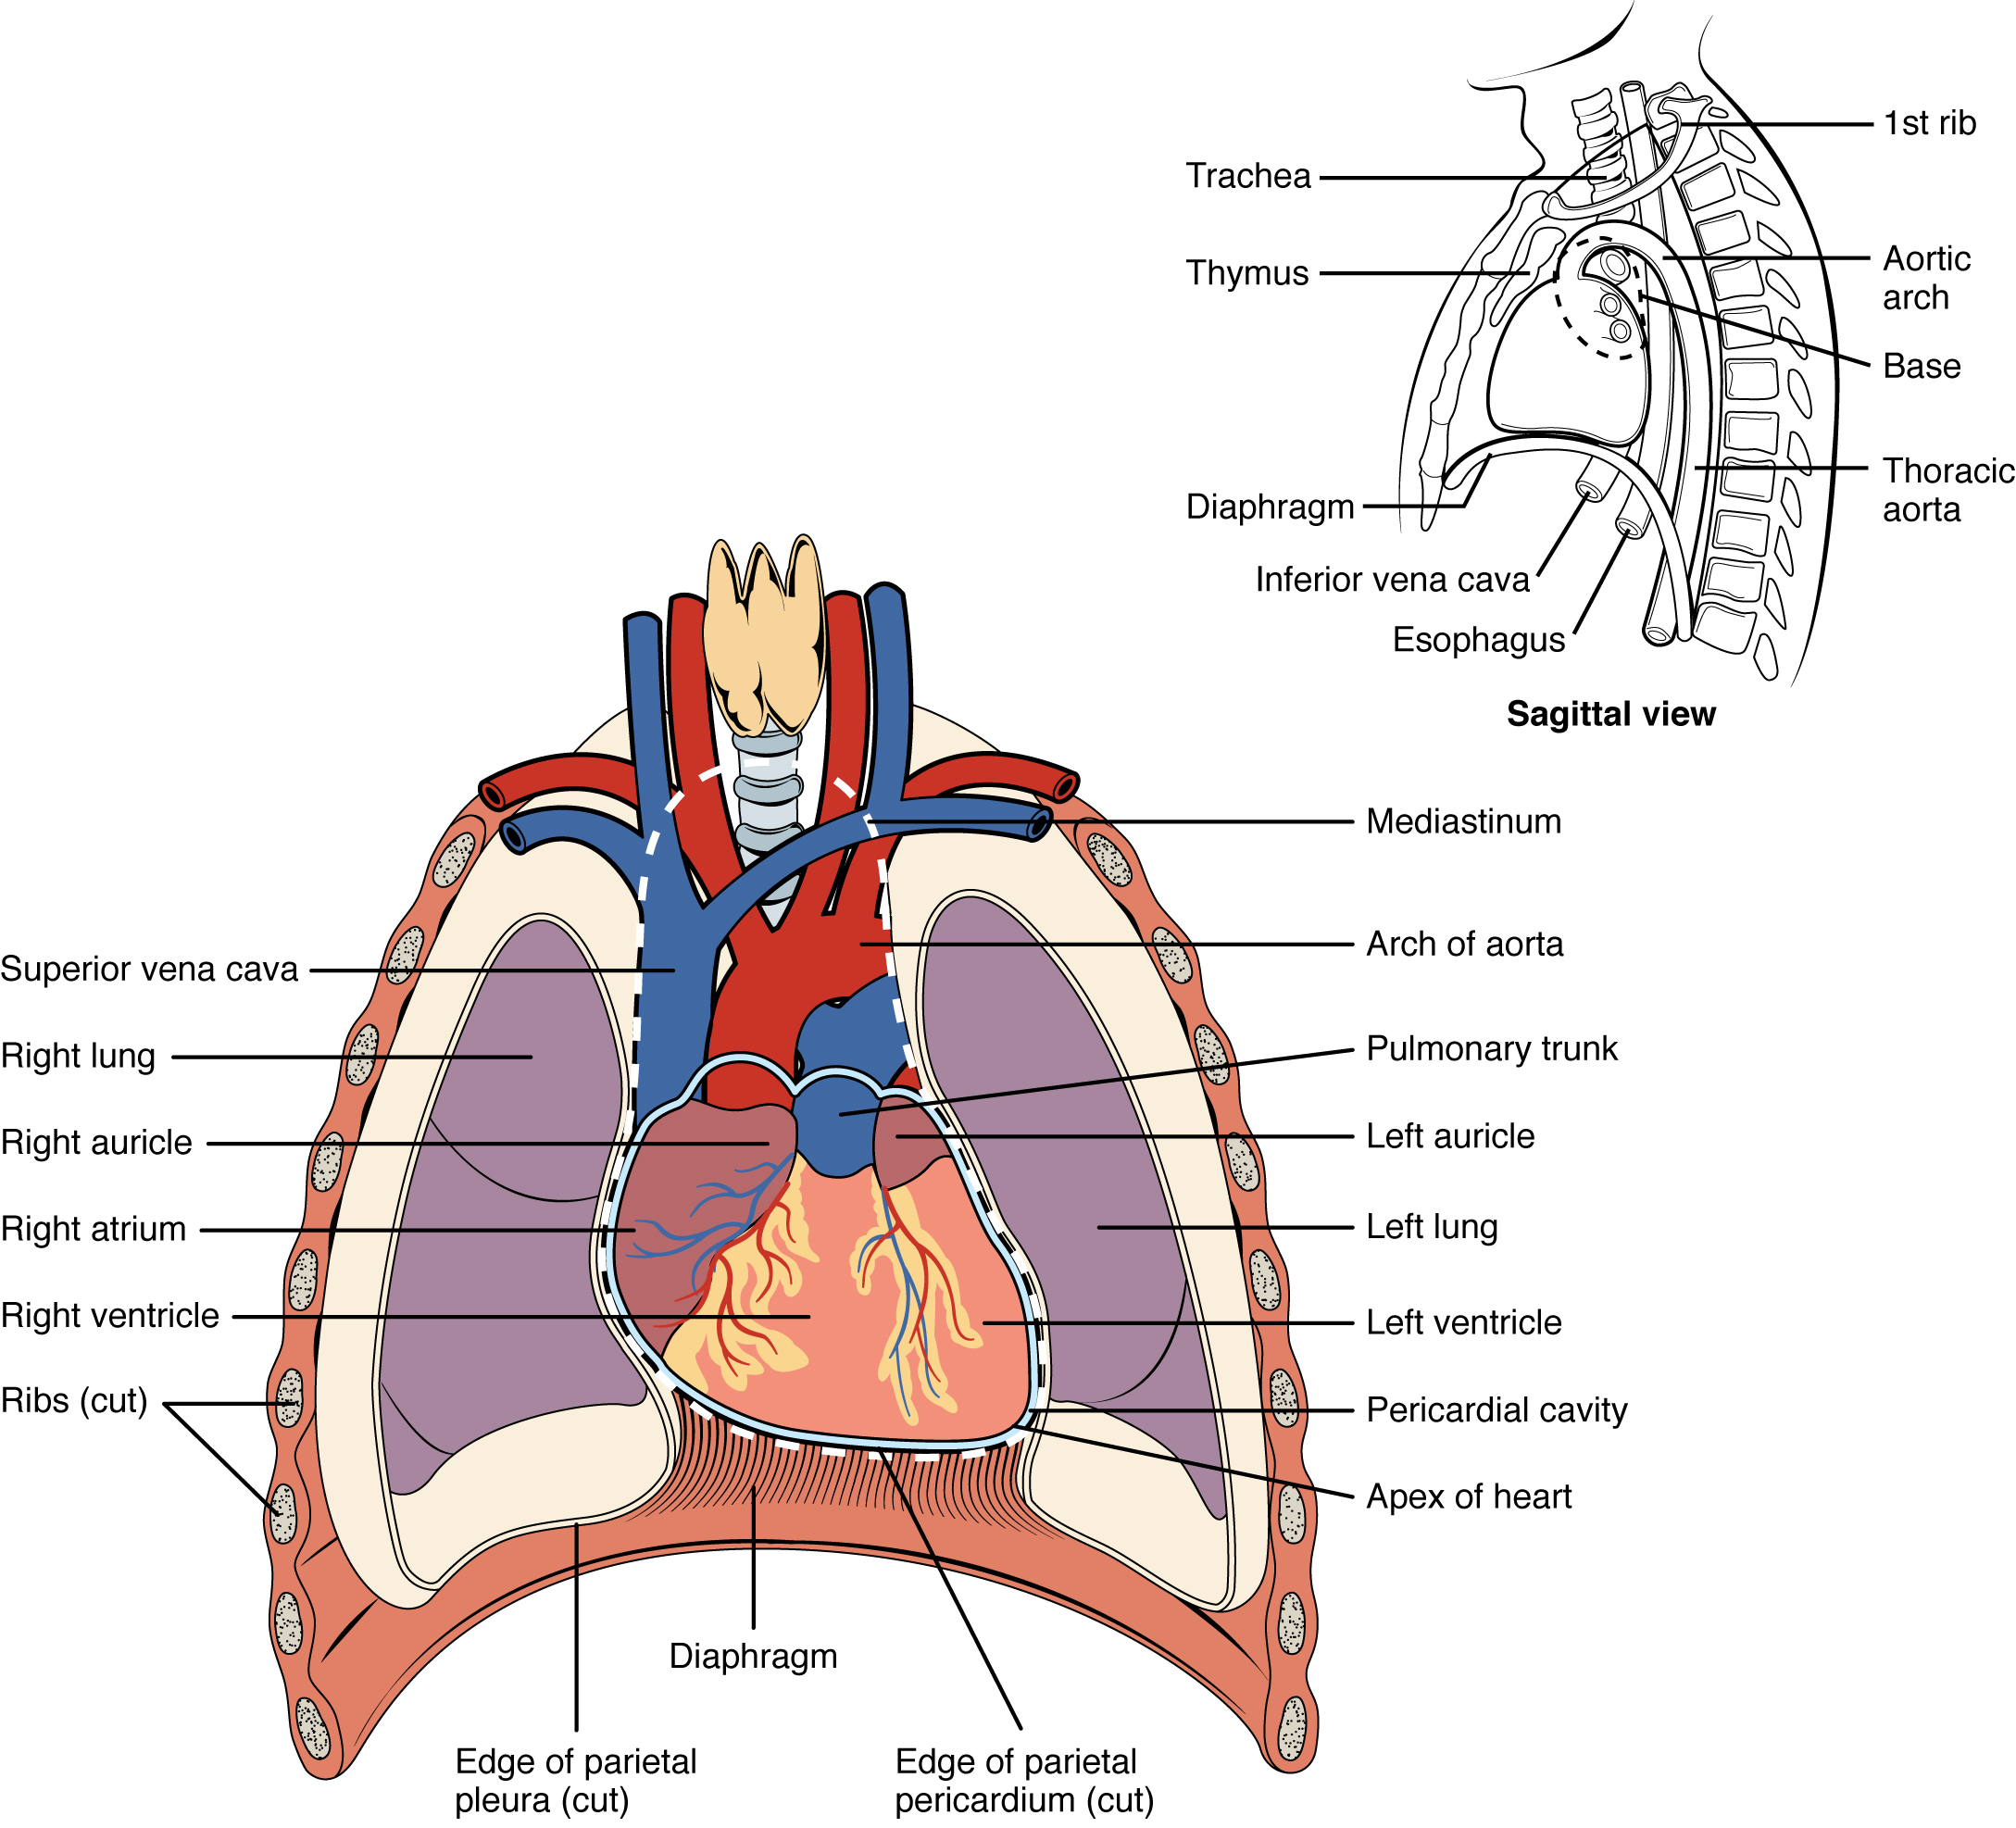 Anatomy of the chest with labels #Ad , #sponsored, #Anatomy#chest#labels